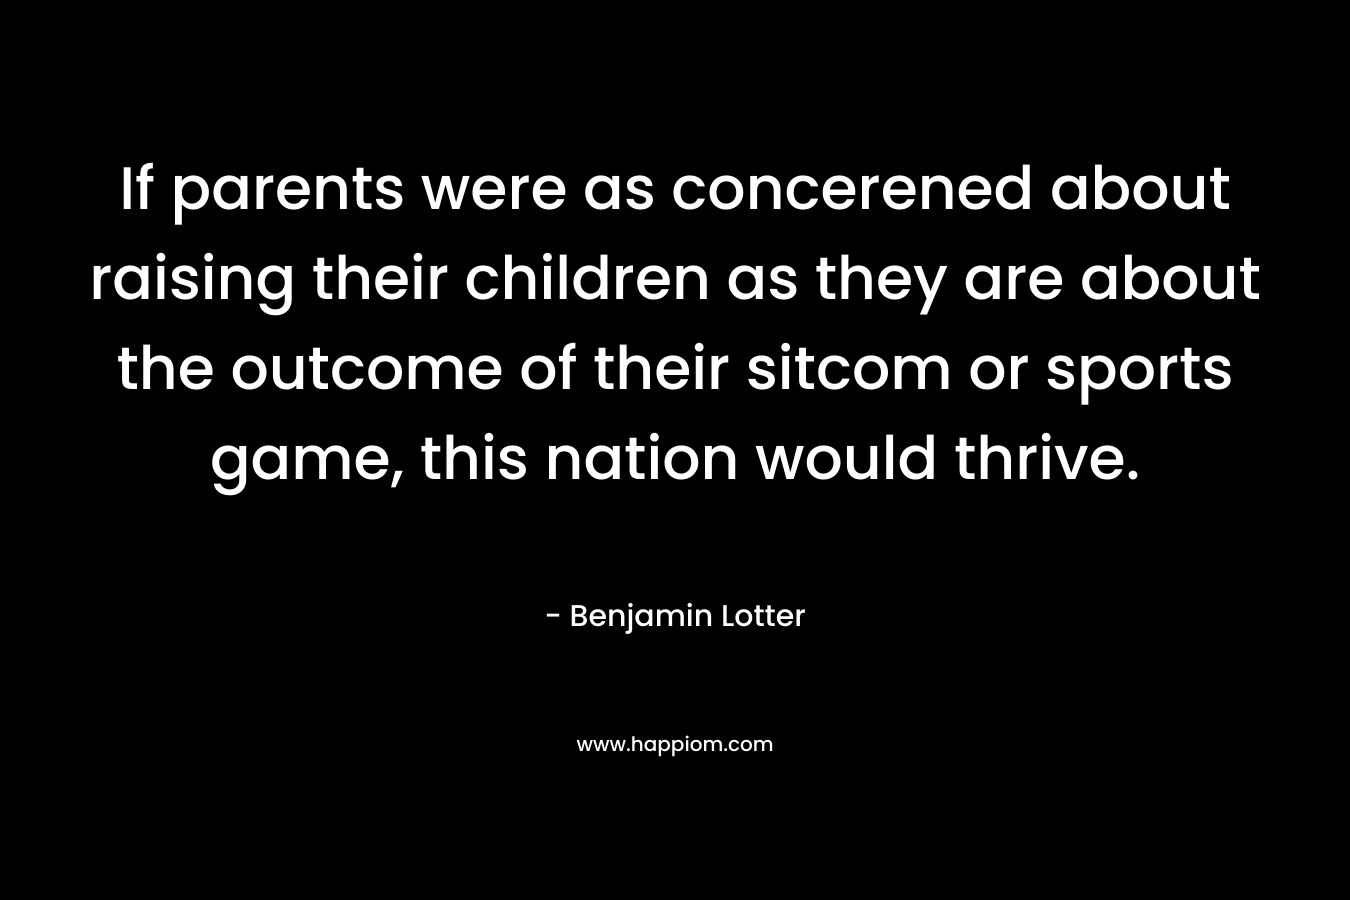 If parents were as concerened about raising their children as they are about the outcome of their sitcom or sports game, this nation would thrive. – Benjamin Lotter